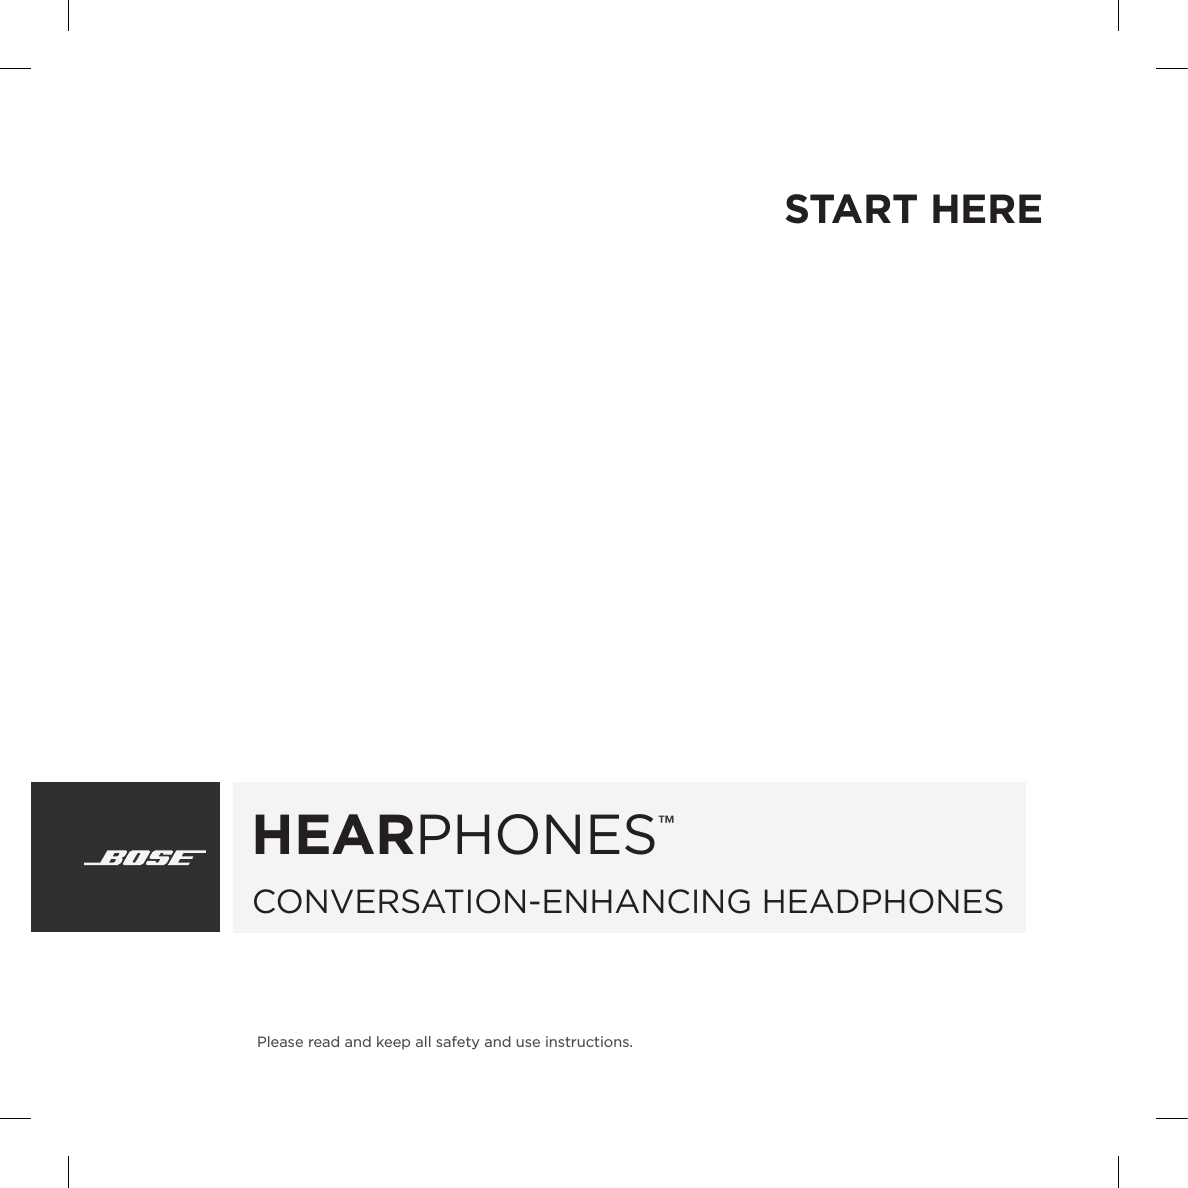 HEARPHONES™CONVERSATION-ENHANCING HEADPHONESPlease read and keep all safety and use instructions.START HERE